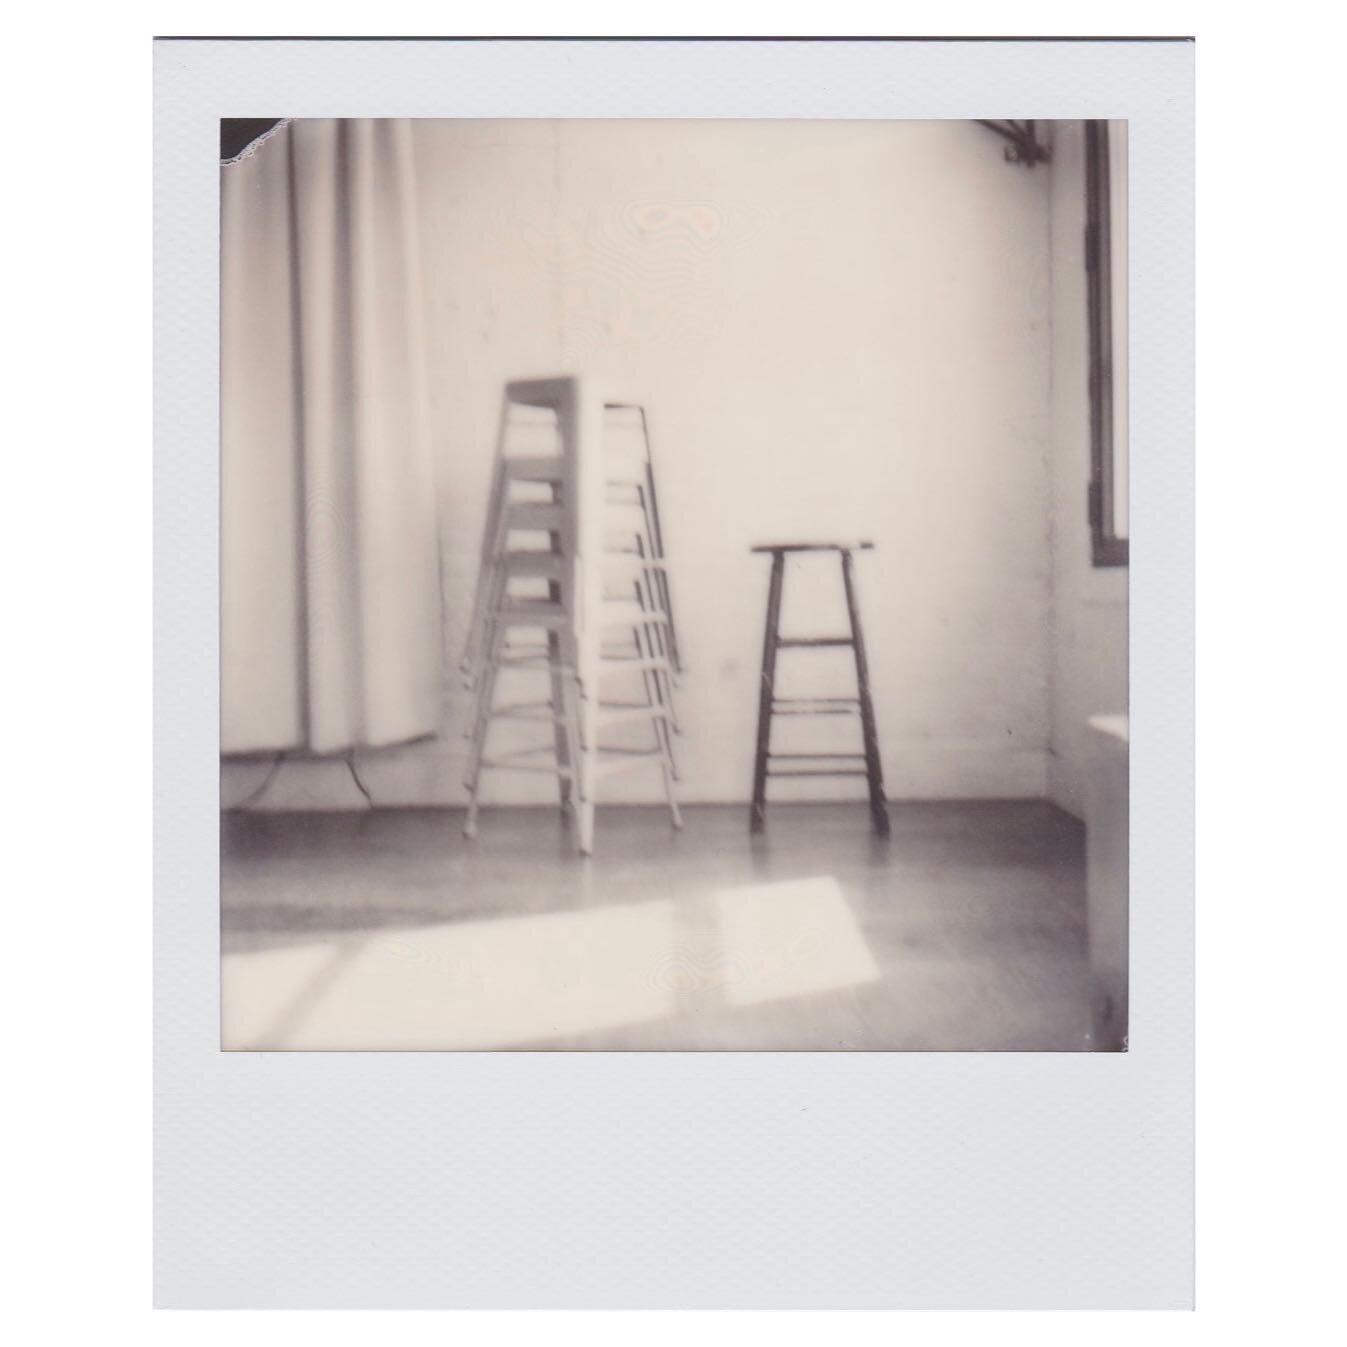 Stools Ample

#polaroid #instagood #bnw #bnw_captures #bnwphotography